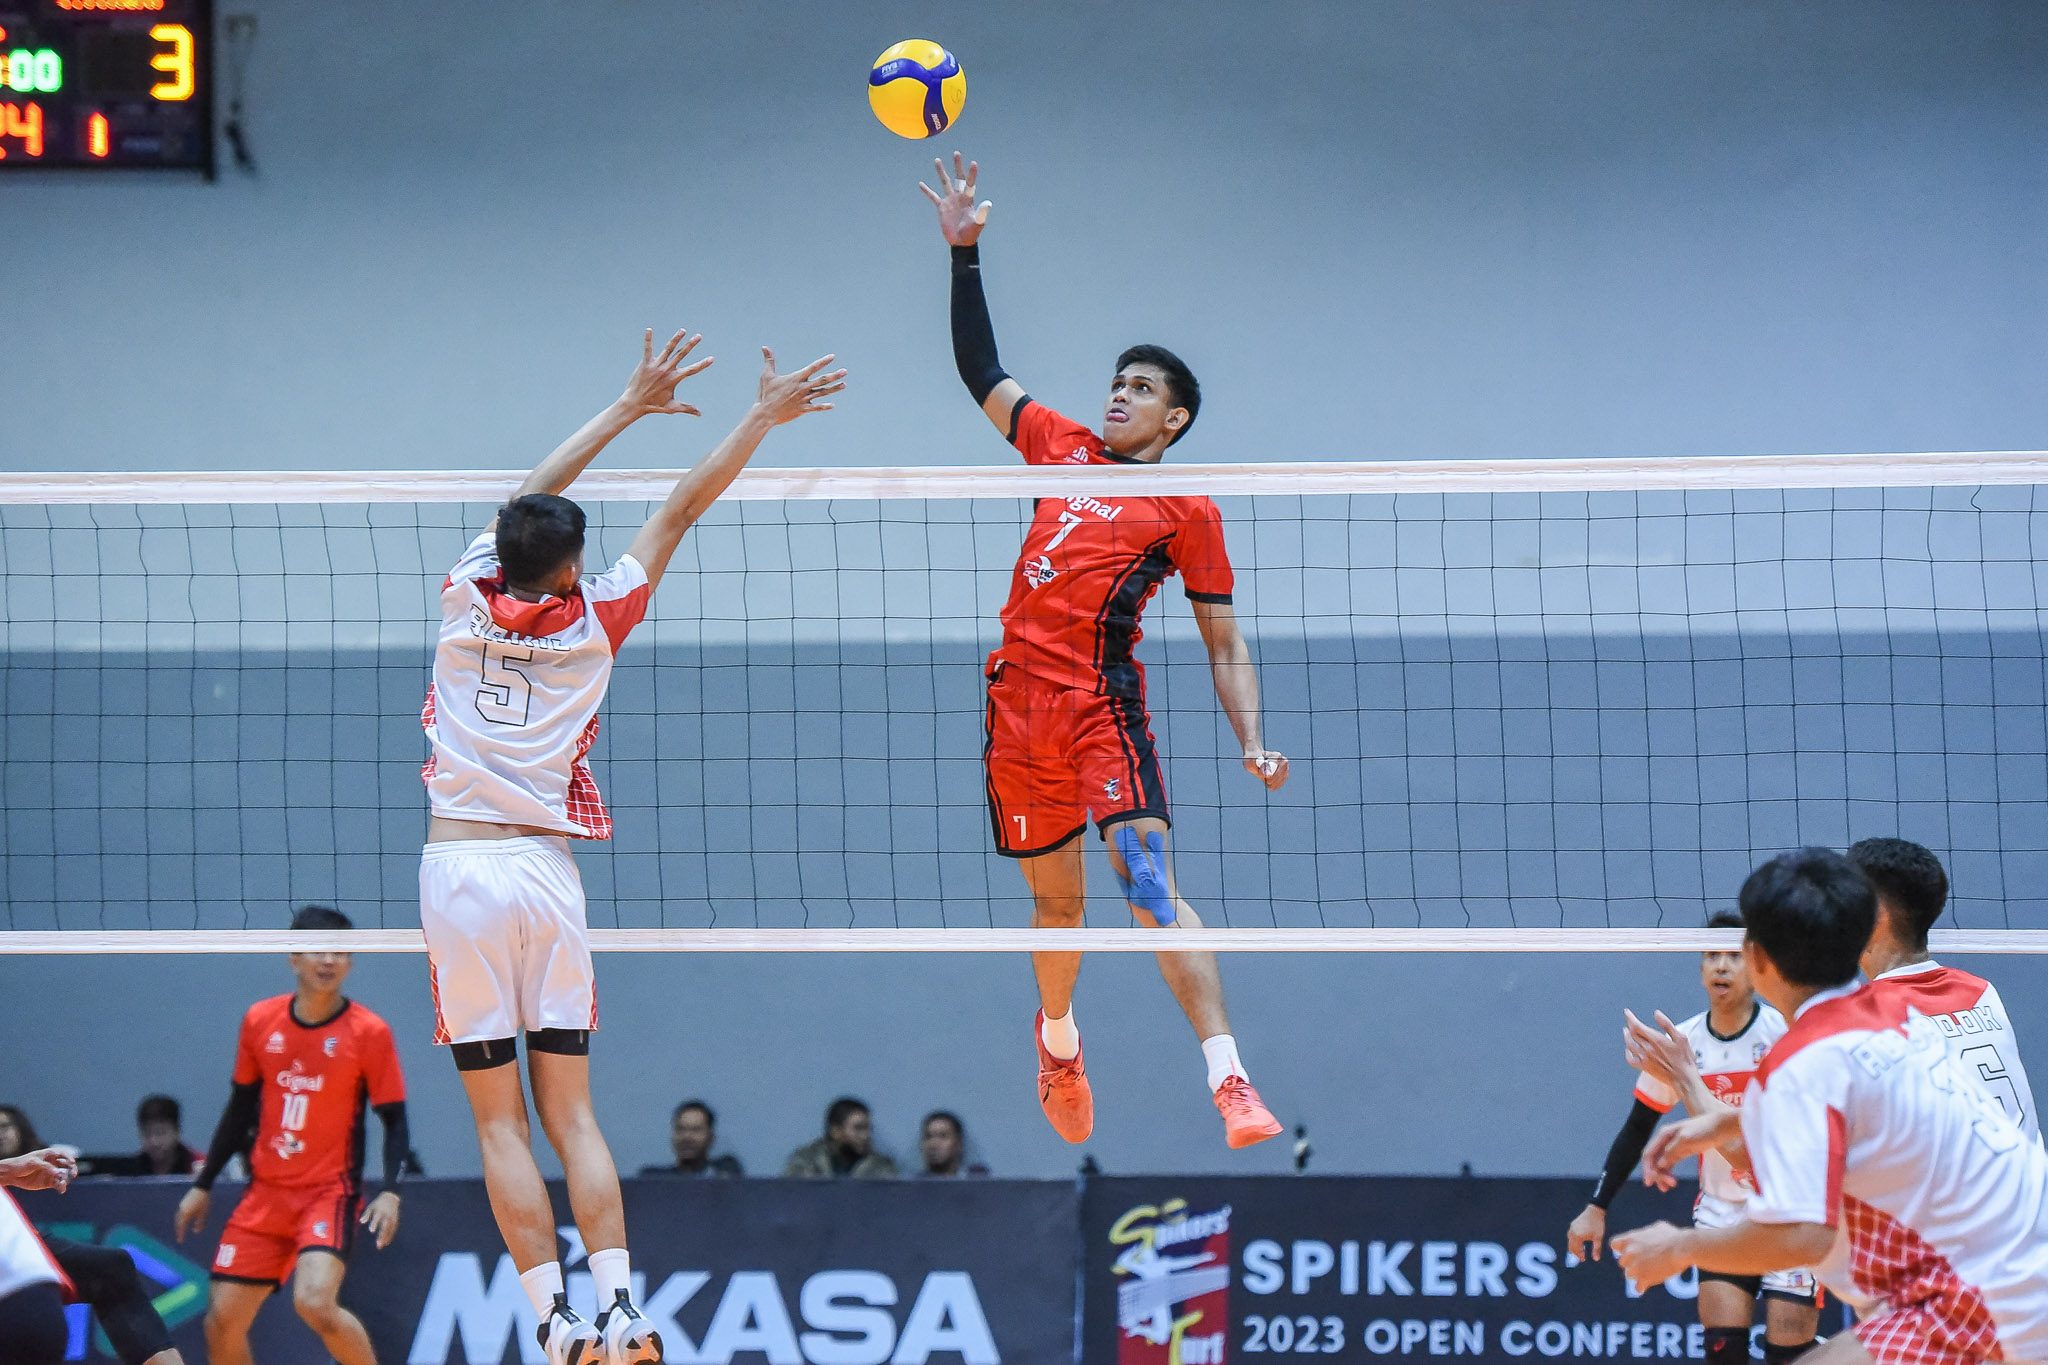 Cignal starts Spikers’ Turf redemption tour with sweep; Cotabato blanks VNS